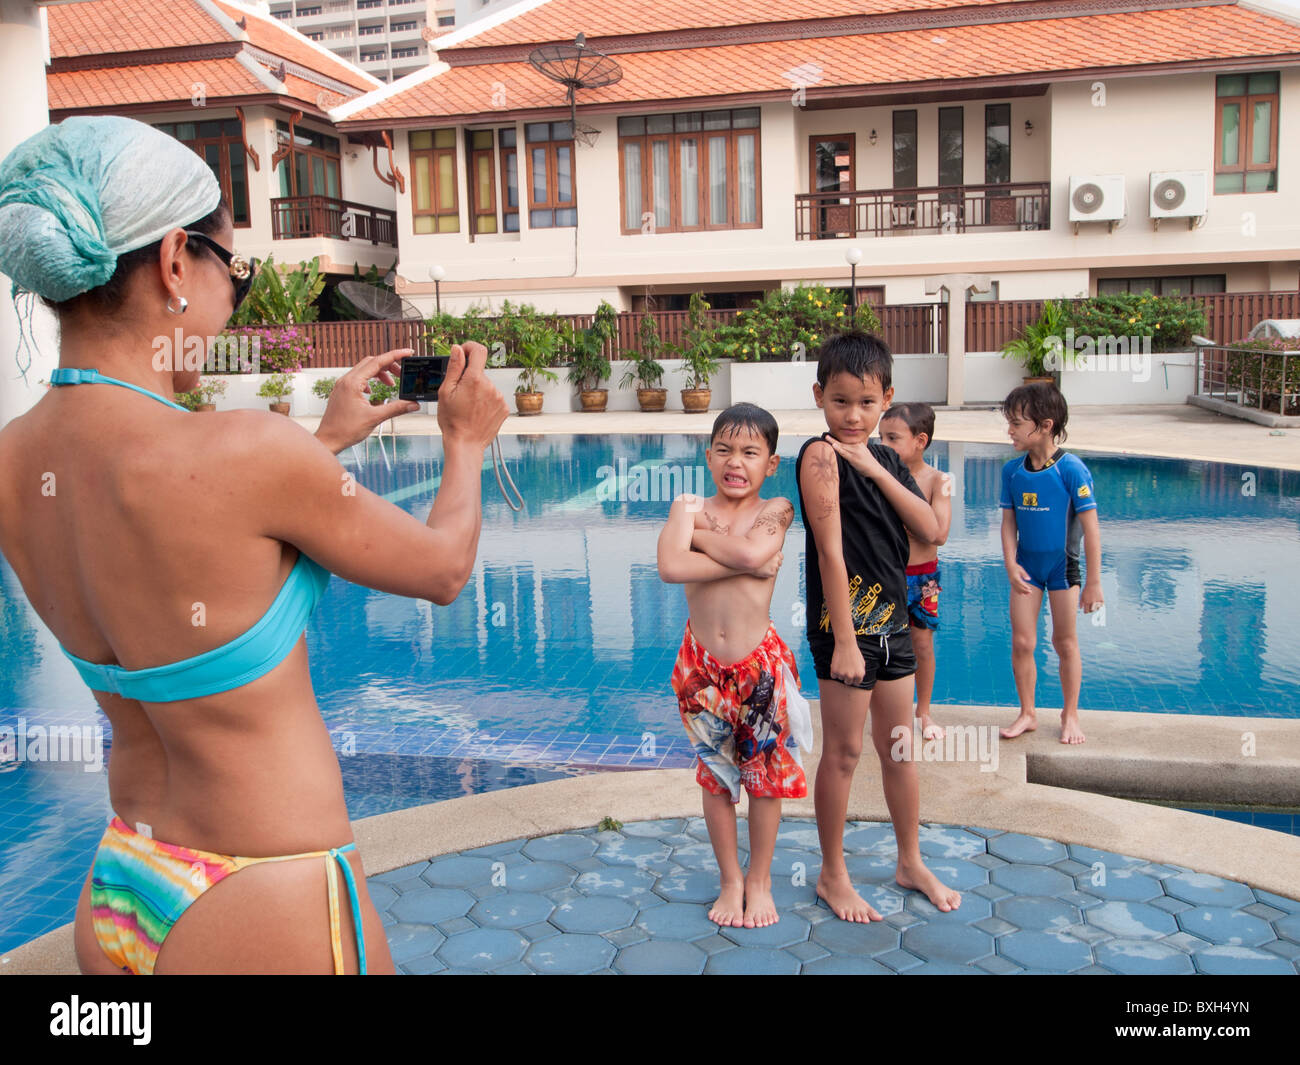 Boys being photographed at the swimming pool by their mother Stock Photo